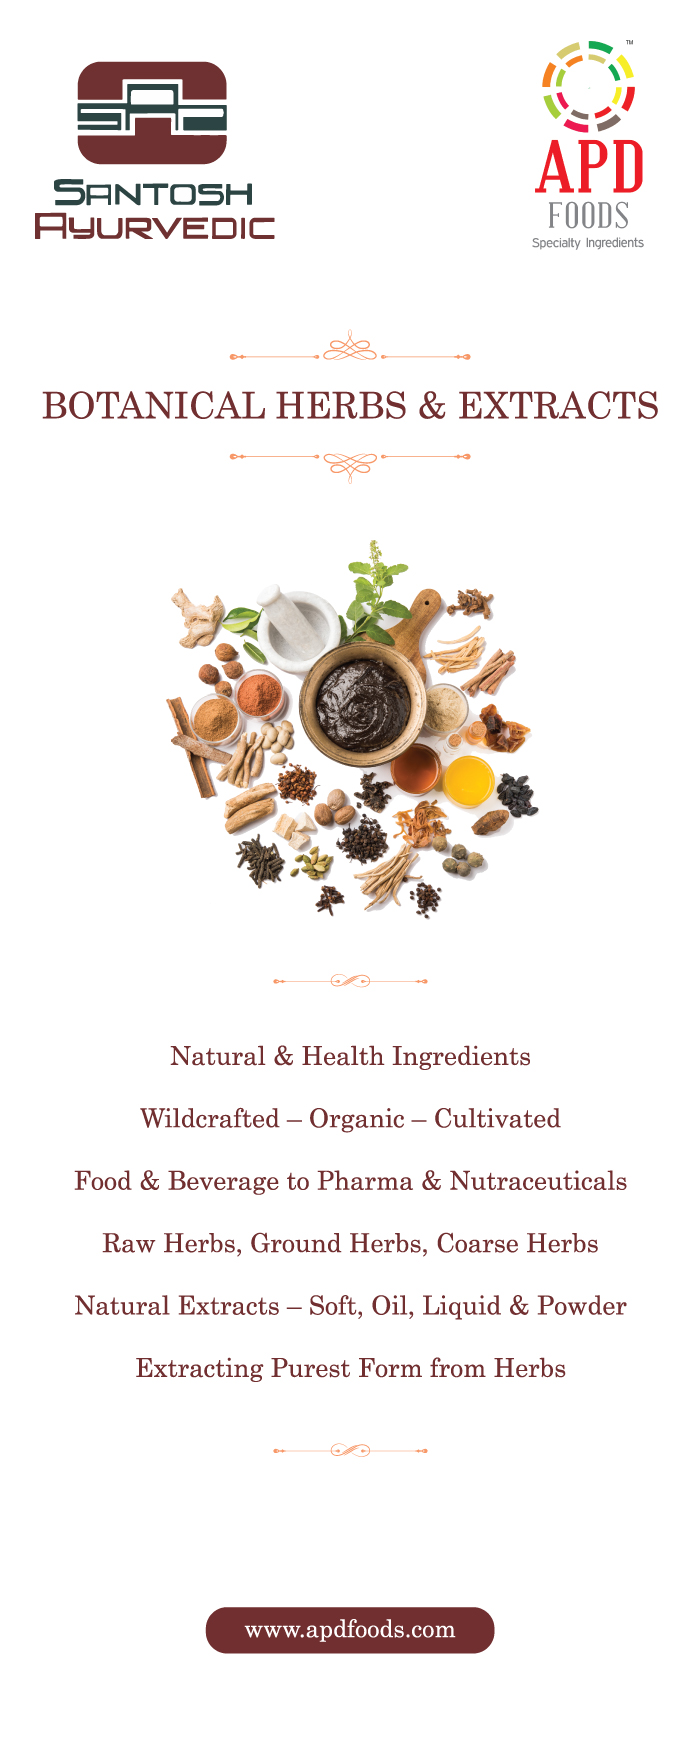 BOTANICAL HERBS AND NATURAL EXTRACTS